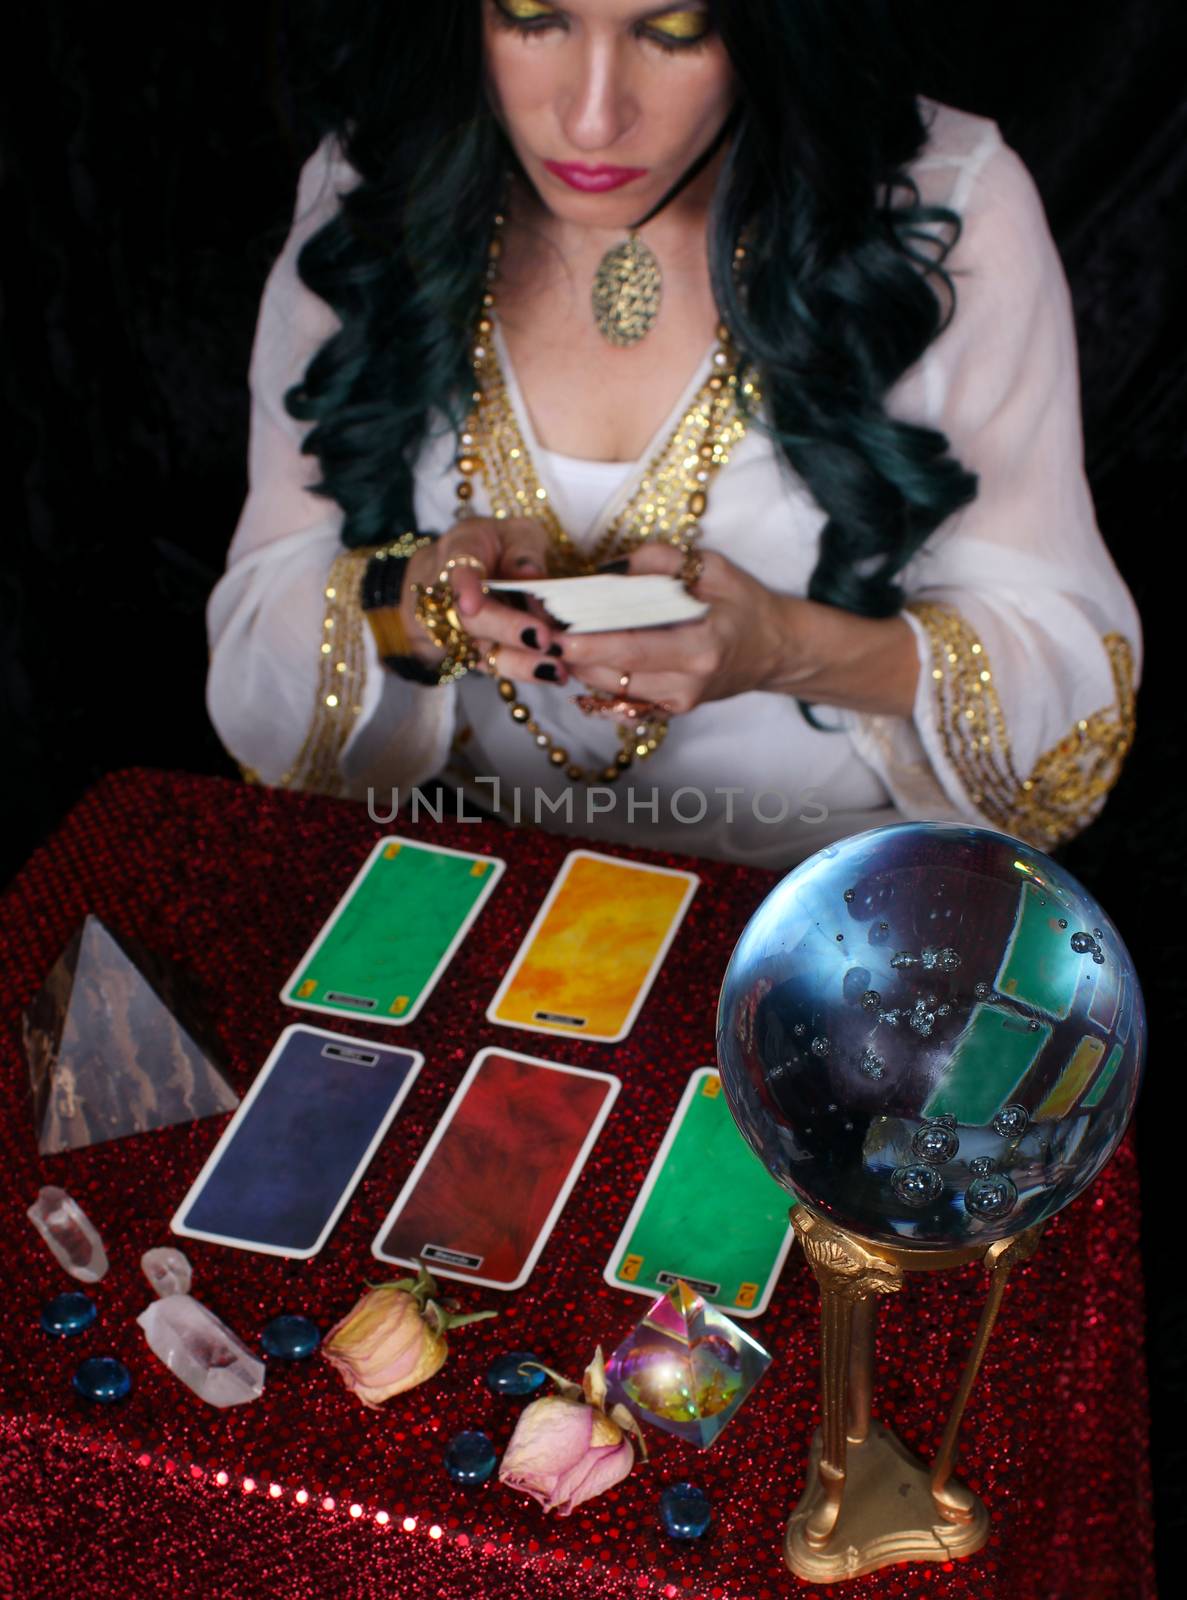 Psychic with green hair  Crystal Ball and tarot cards Shallow DOF, Focus on Crystal Ball